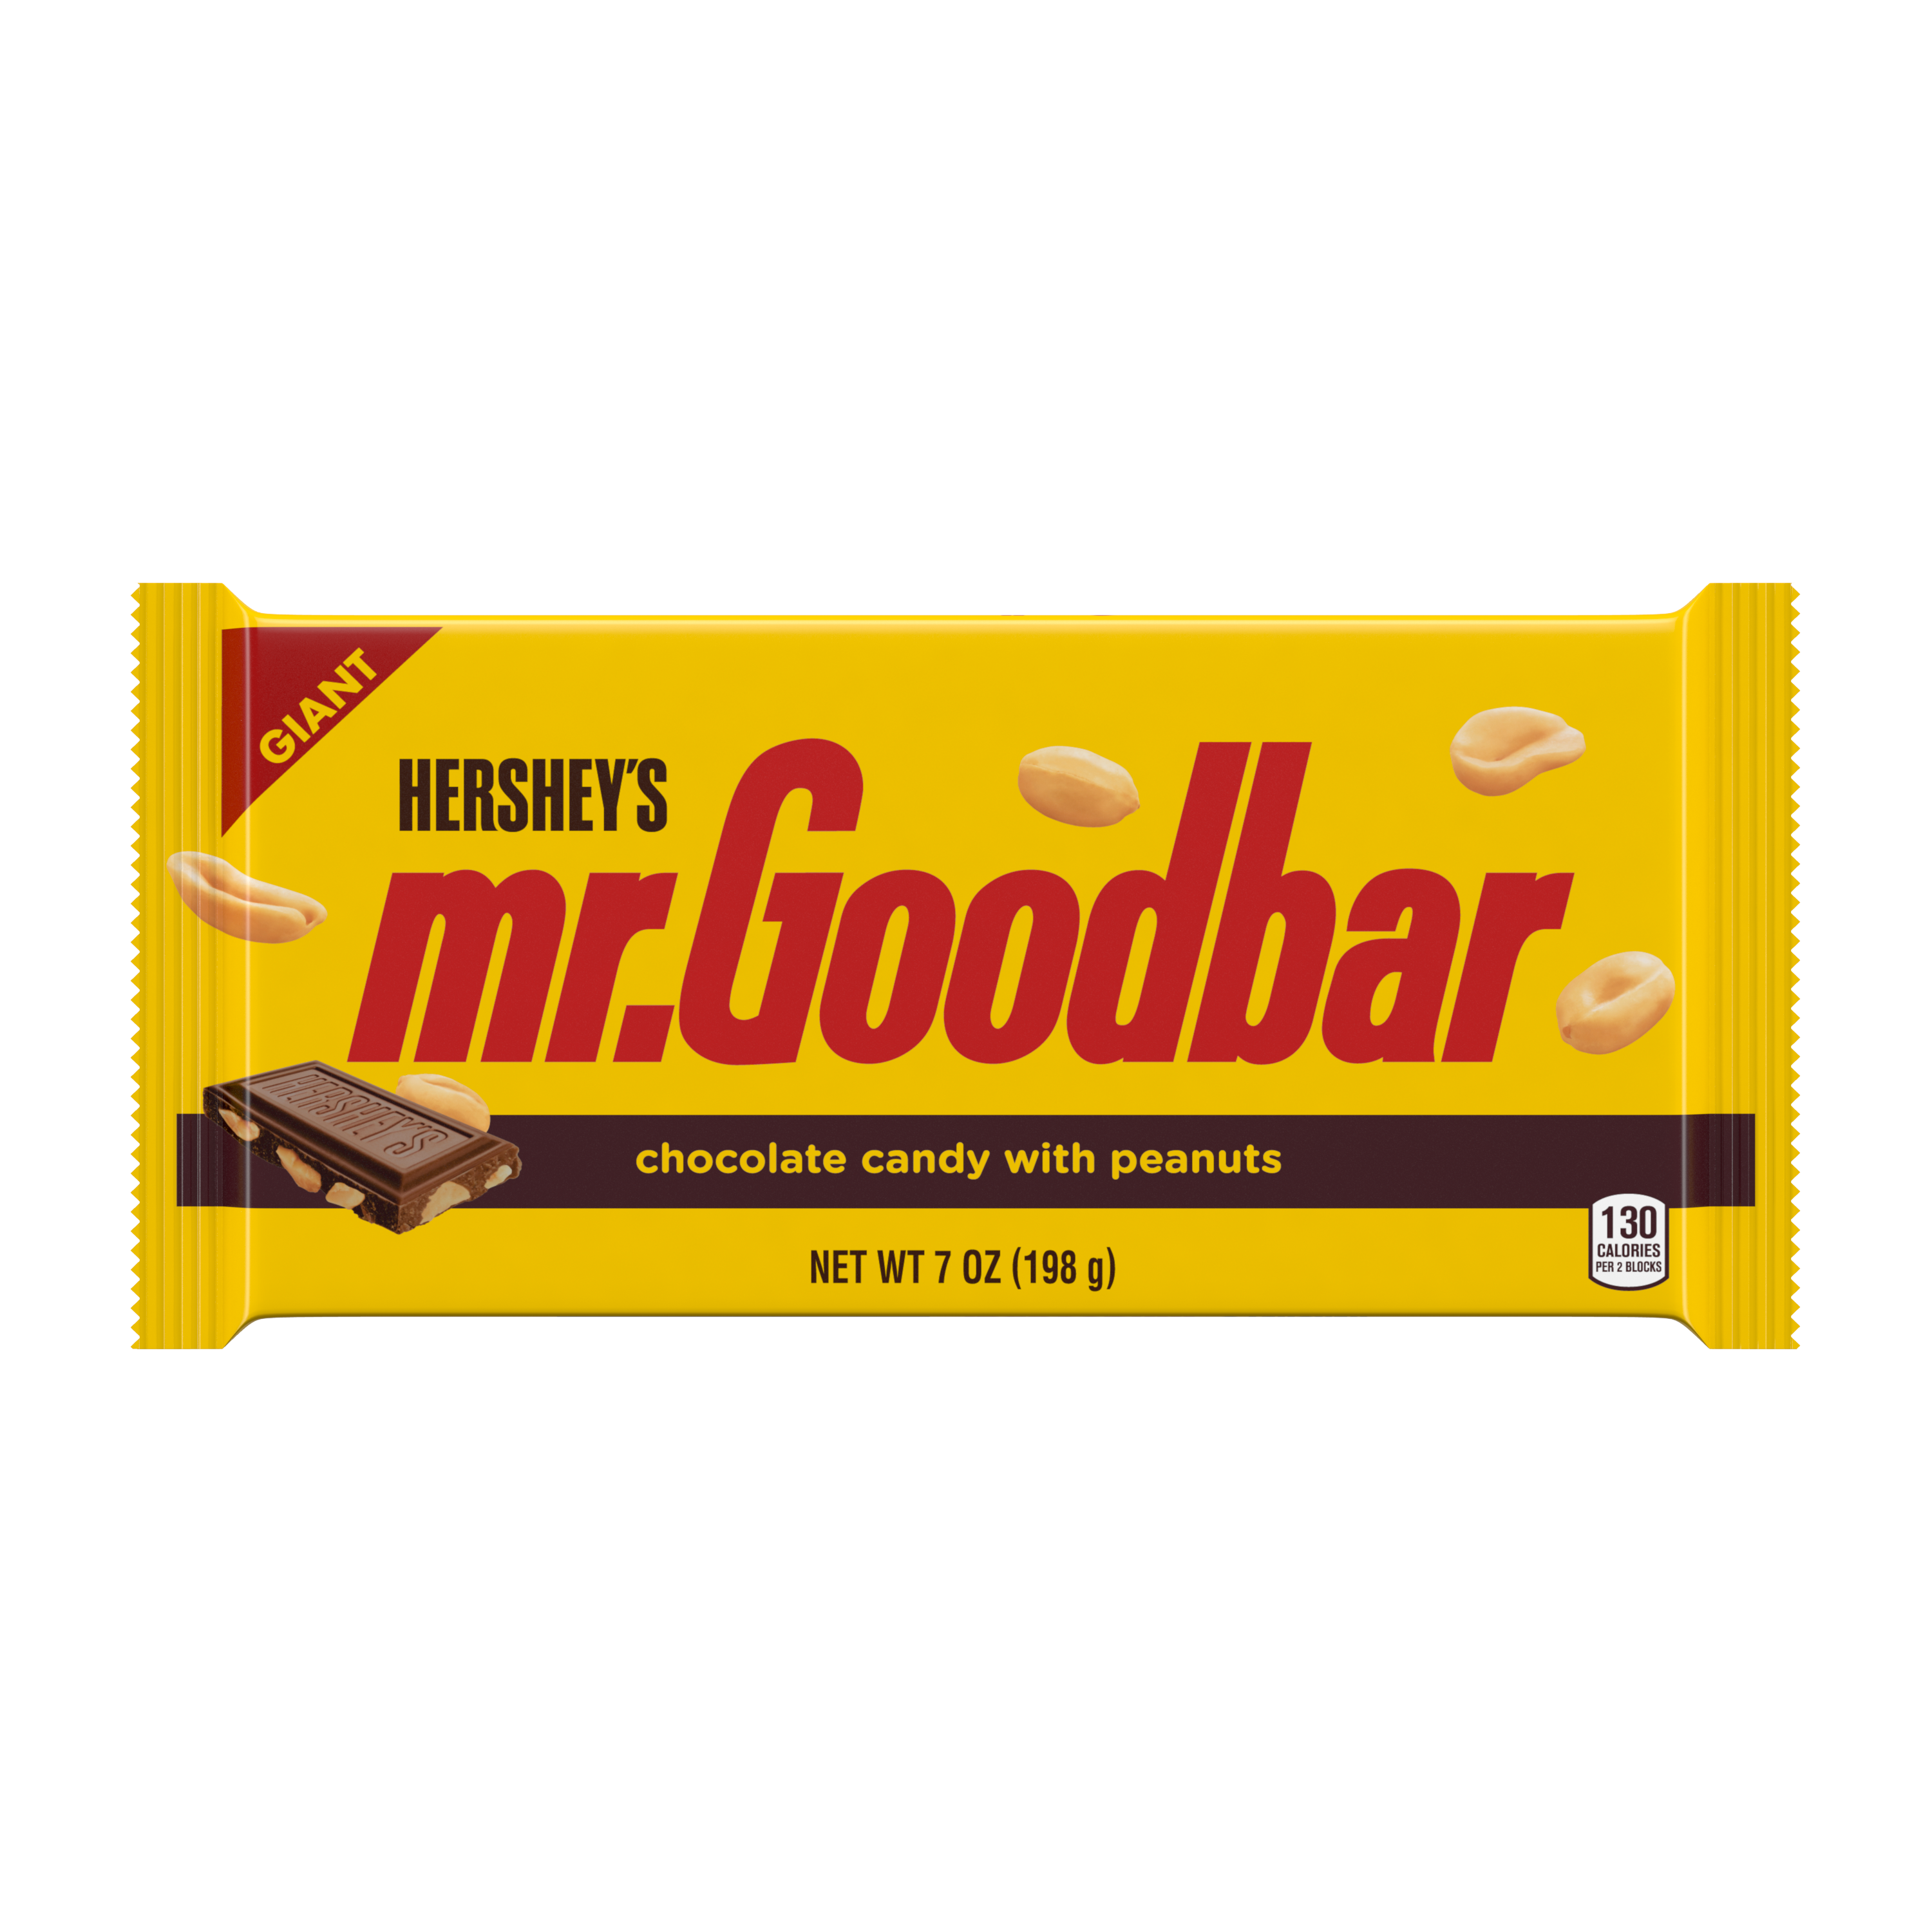 HERSHEY'S MR. GOODBAR Milk Chocolate with Peanuts Giant Candy Bar, 7 oz - Front of Package